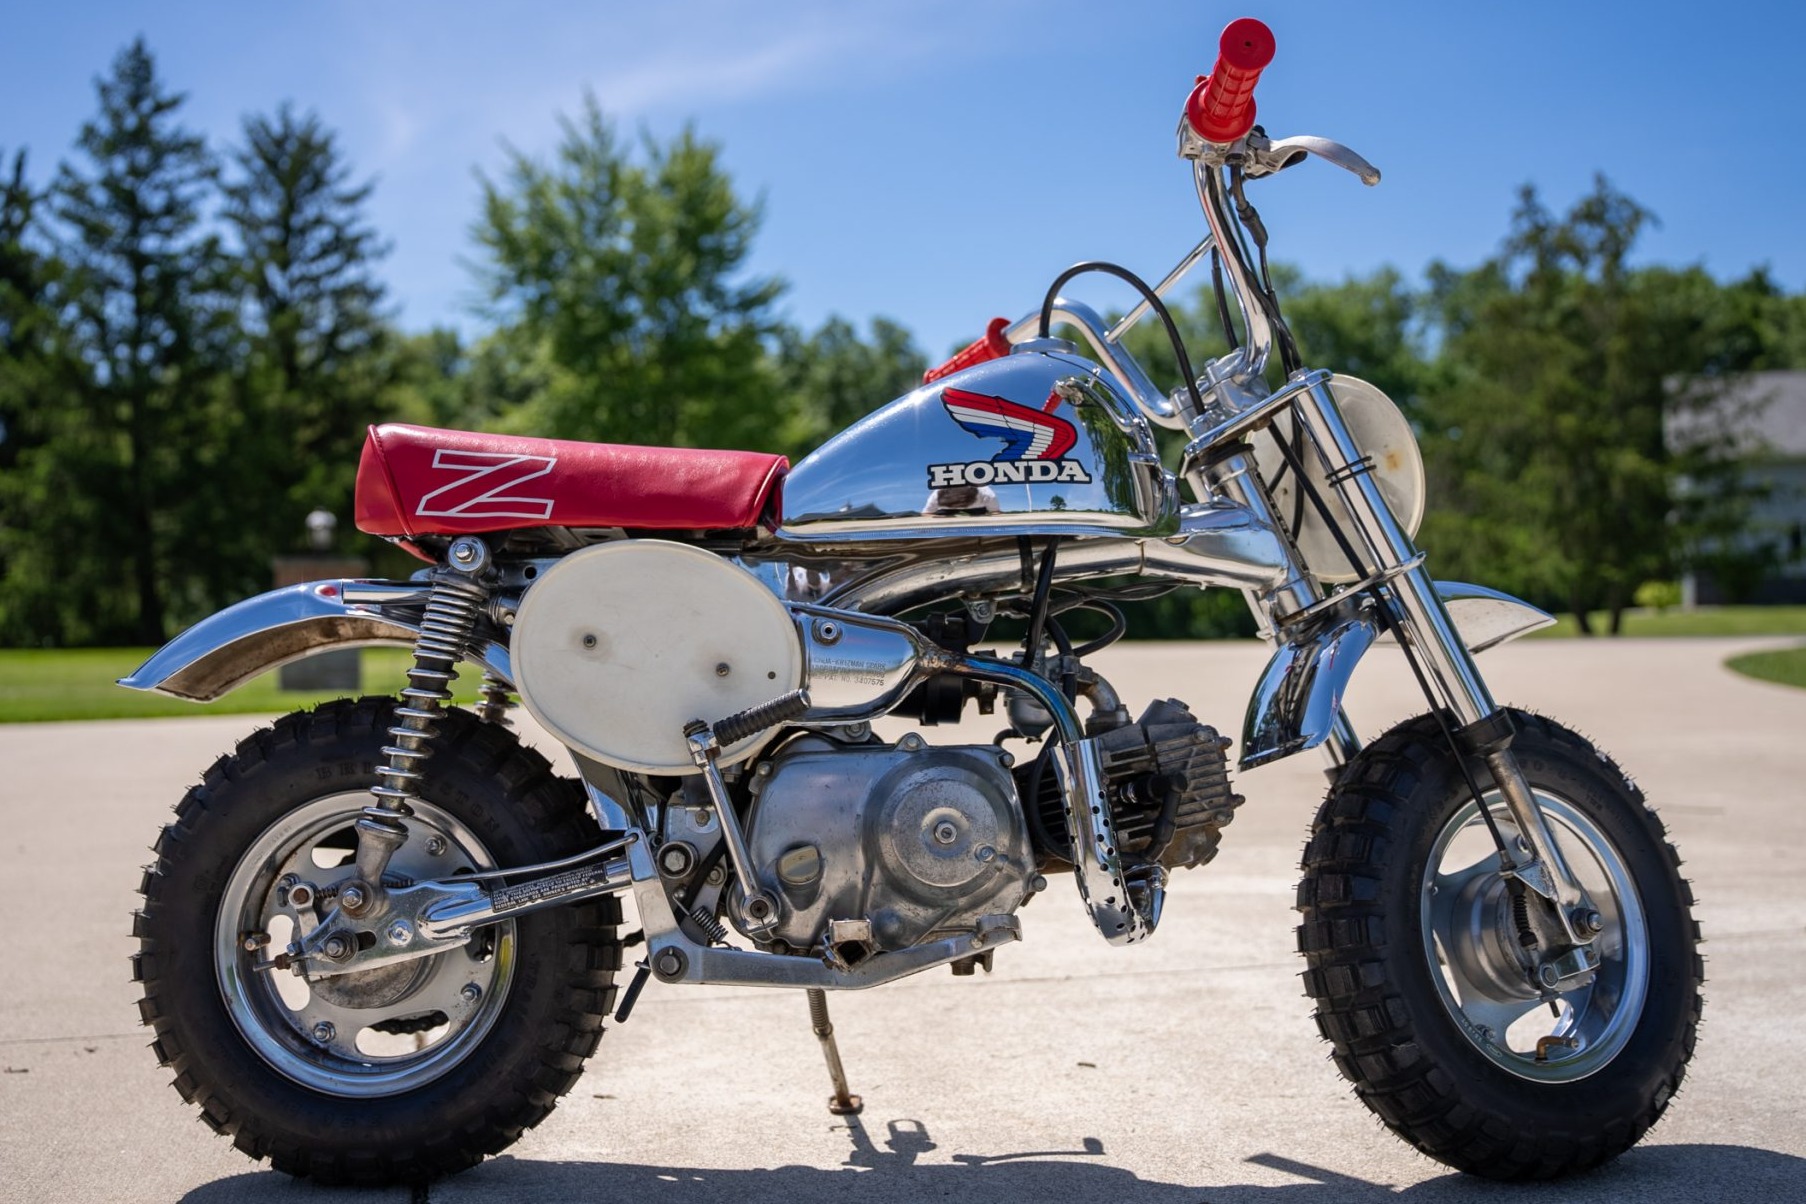 Used 1986 Honda Z50RD Christmas Special Review